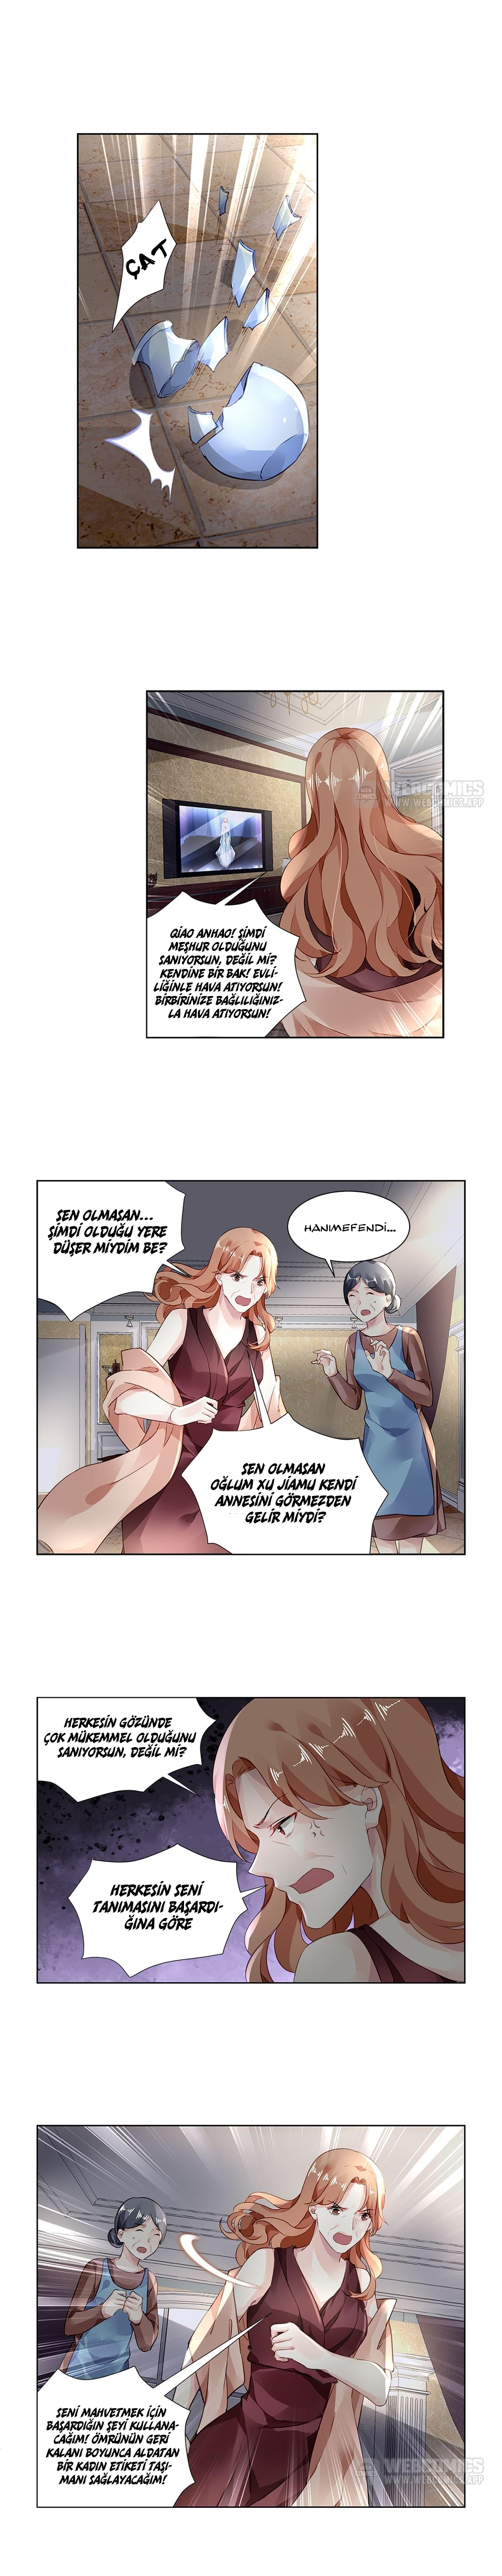 Guomin Laogong Dai Huijia: Chapter 163 - Page 2